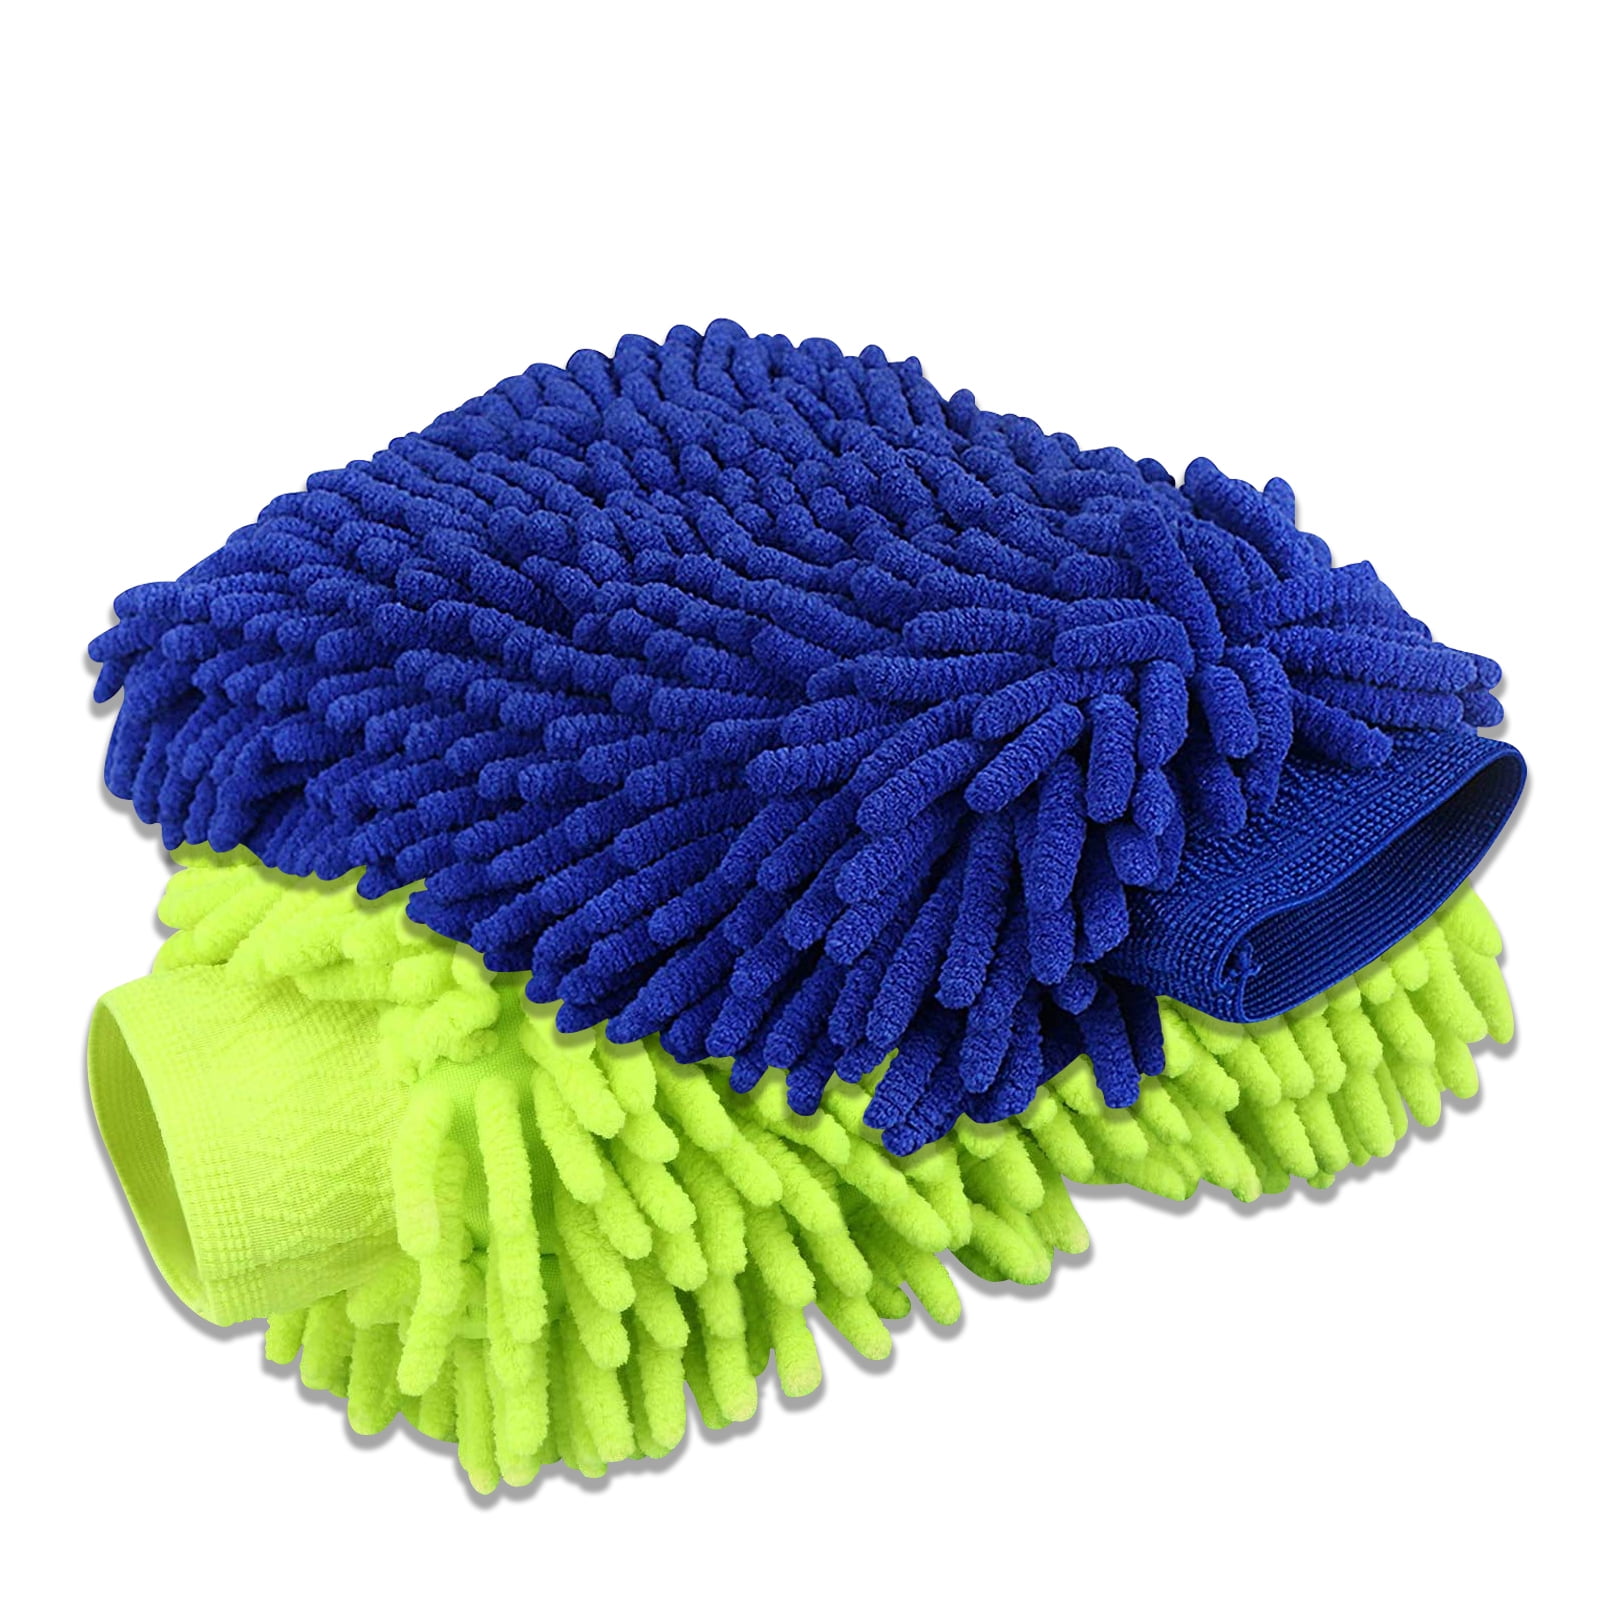 6 Pack Large Size Chenille Microfiber Car Wash Mitt Cleaning Kit 